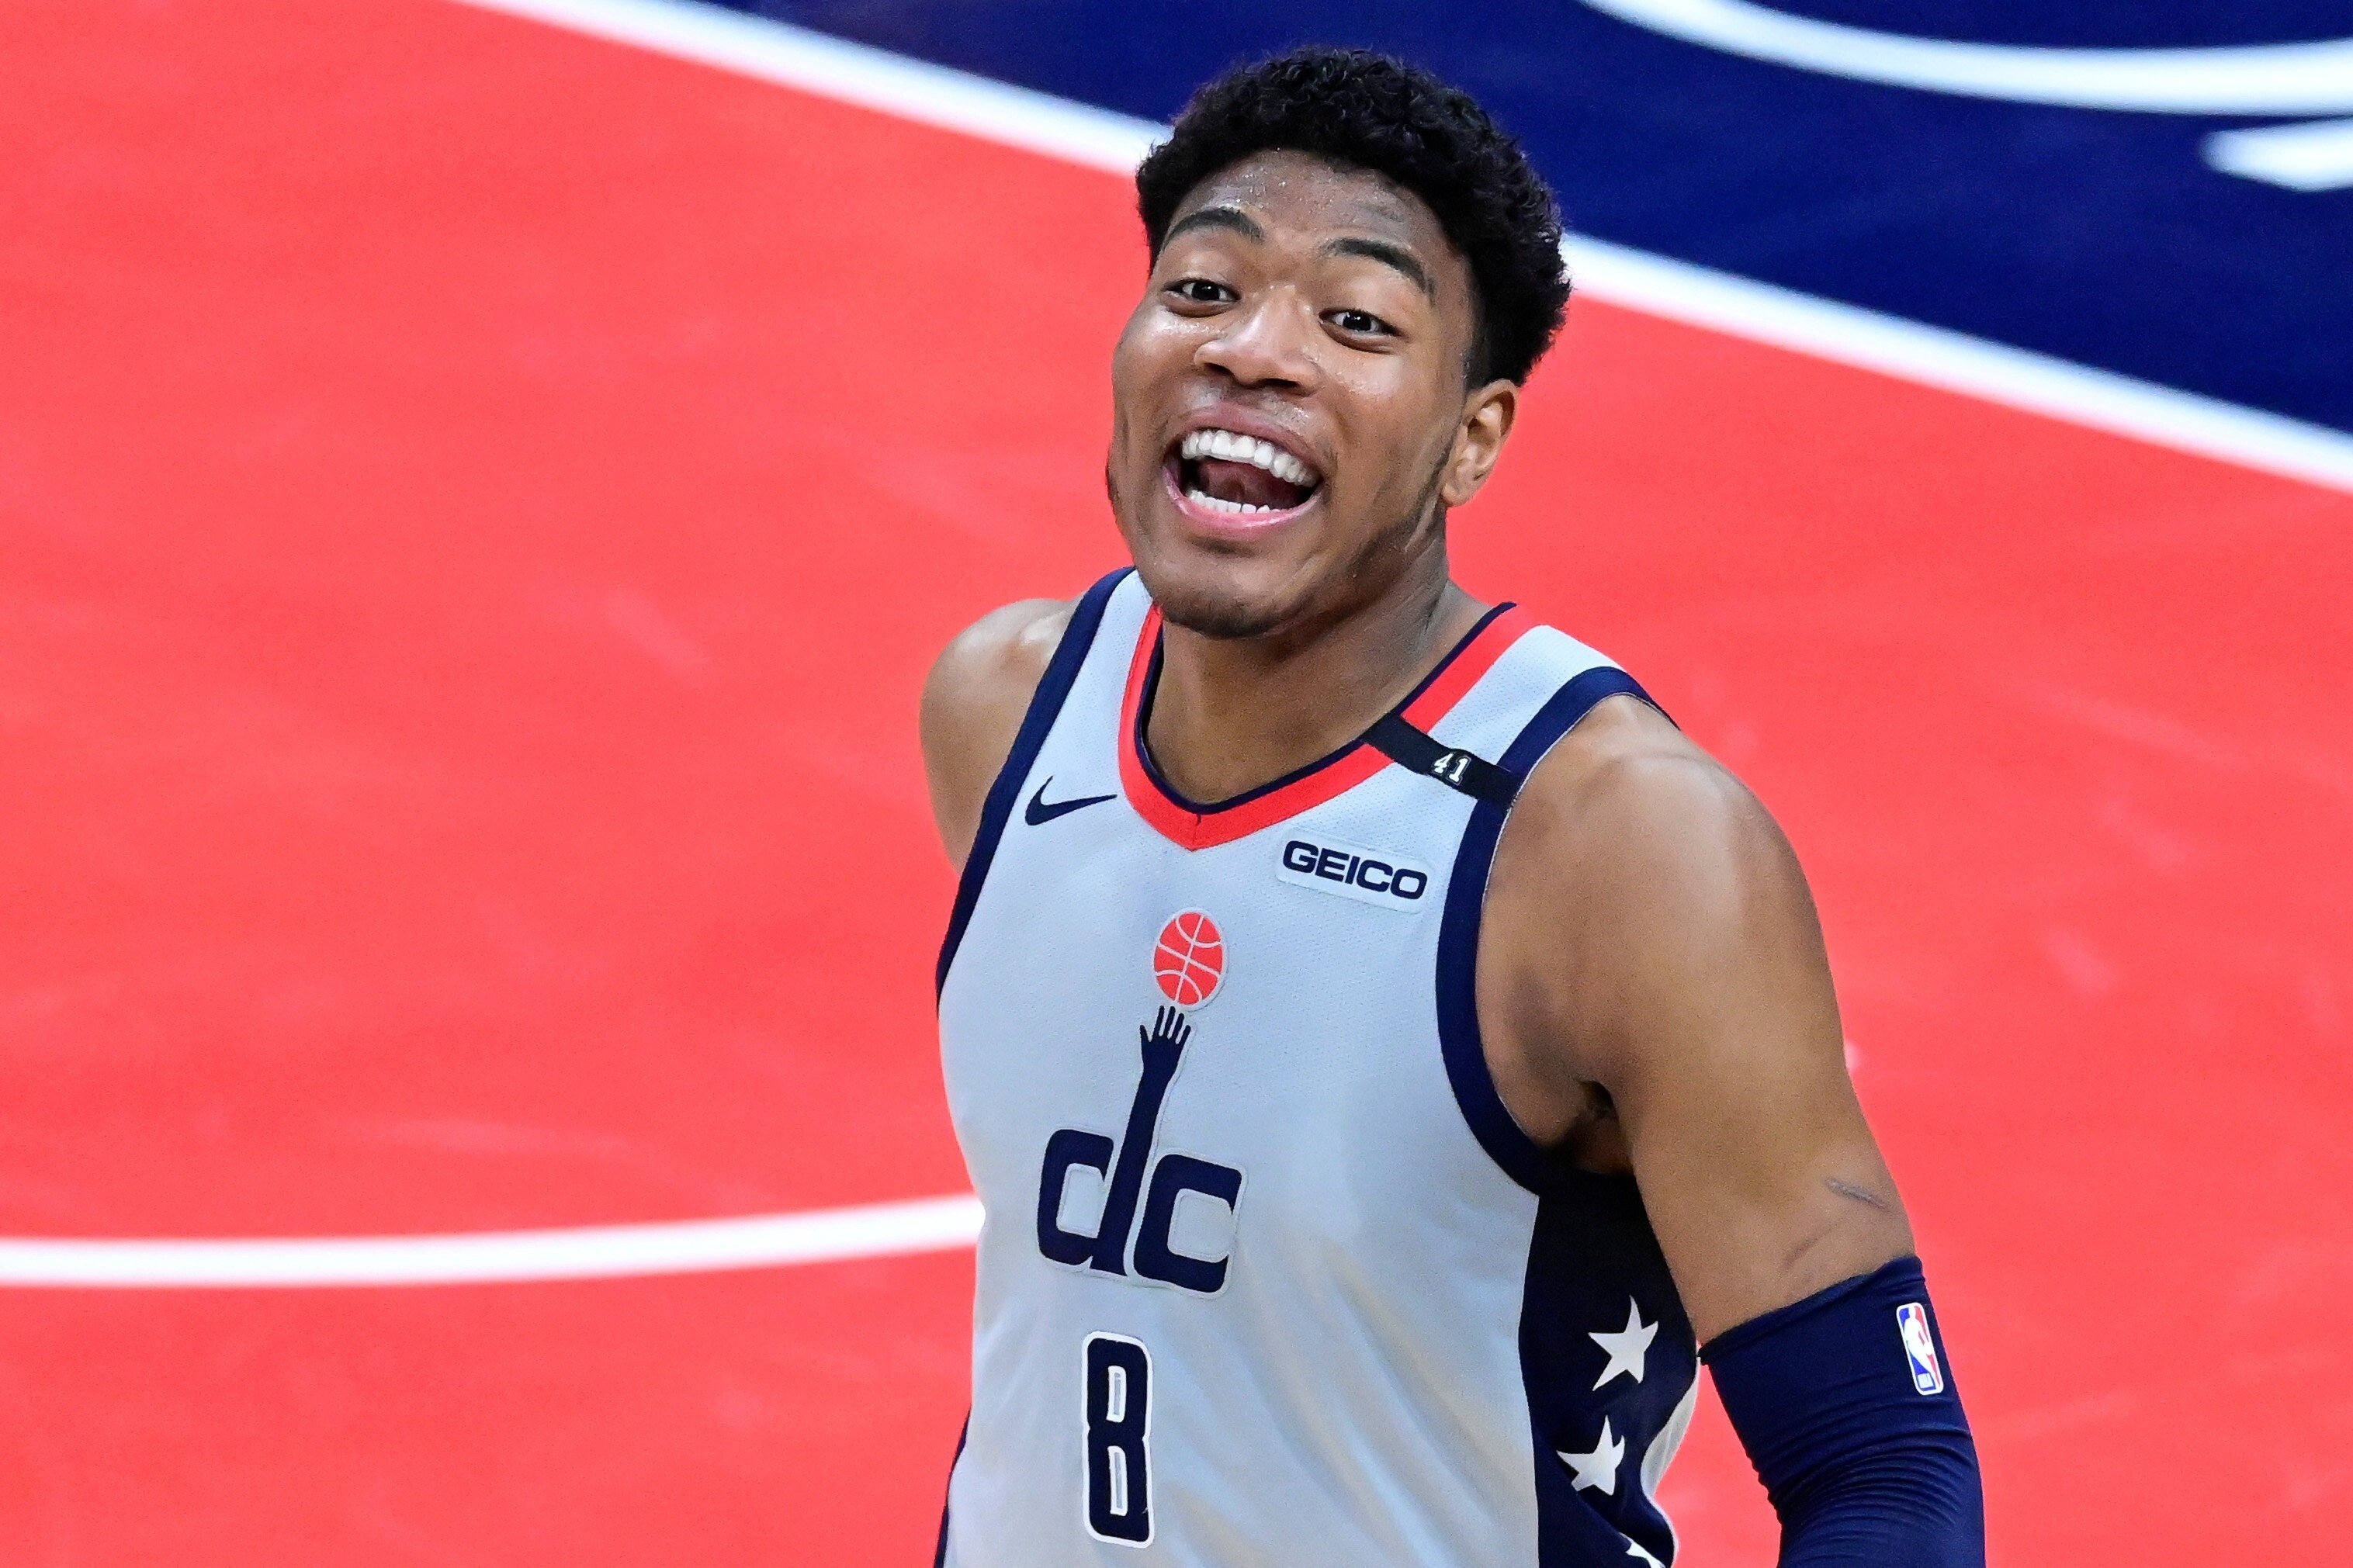 Washington Wizards player Rui Hachimura in a match against the Philadelphia 76ers in the first round of the 2021 NBA Playoffs in May. Photo: USA Today